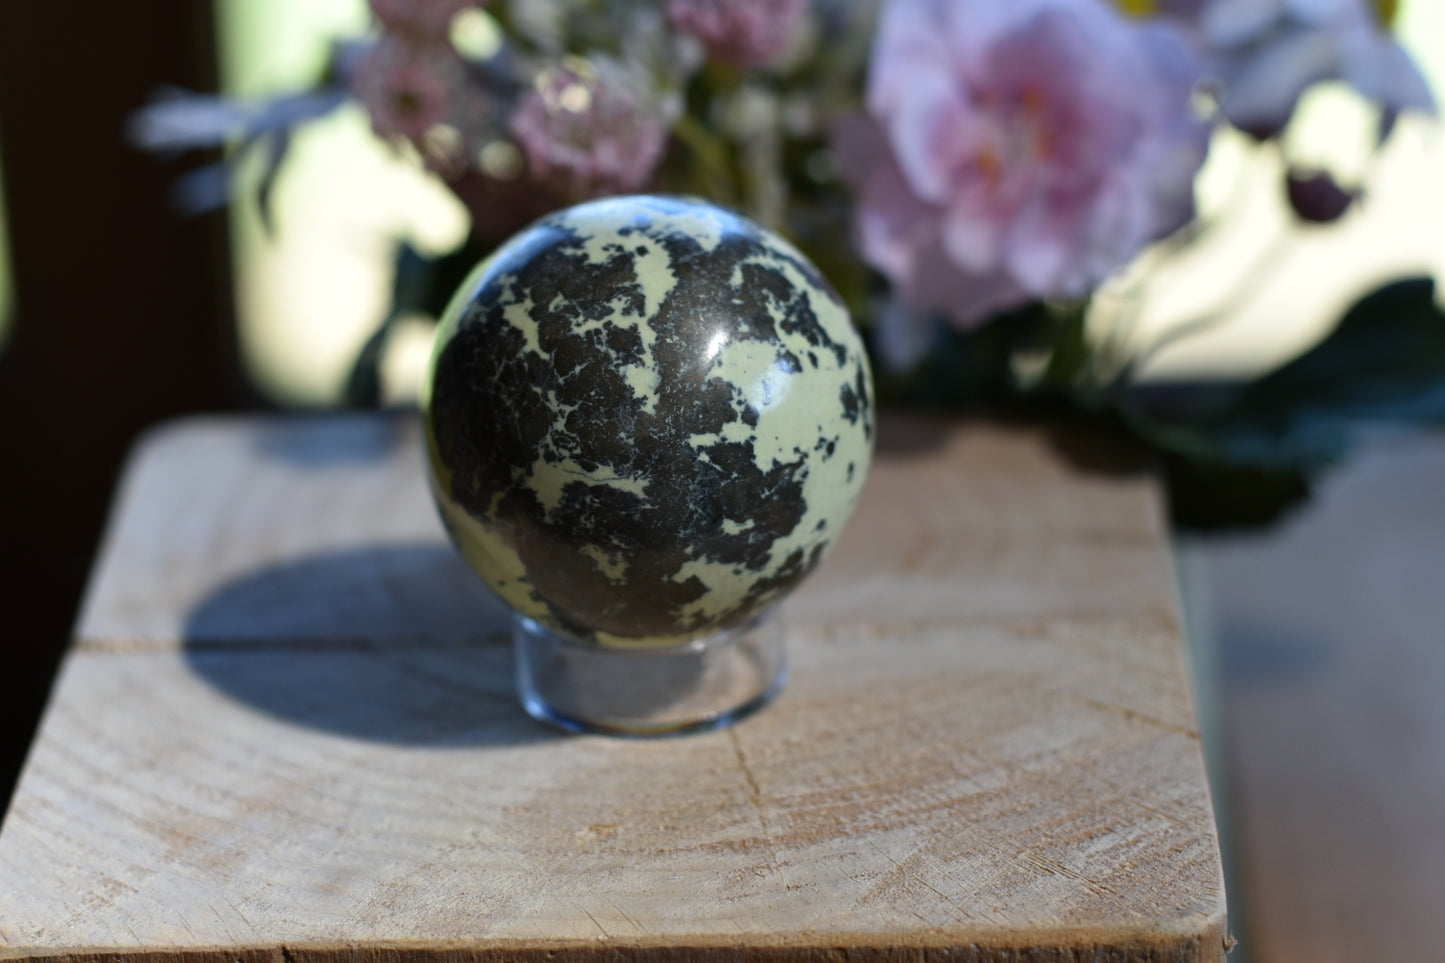 Yellow Serpentine with Pyrite inclusions 45mm Sphere